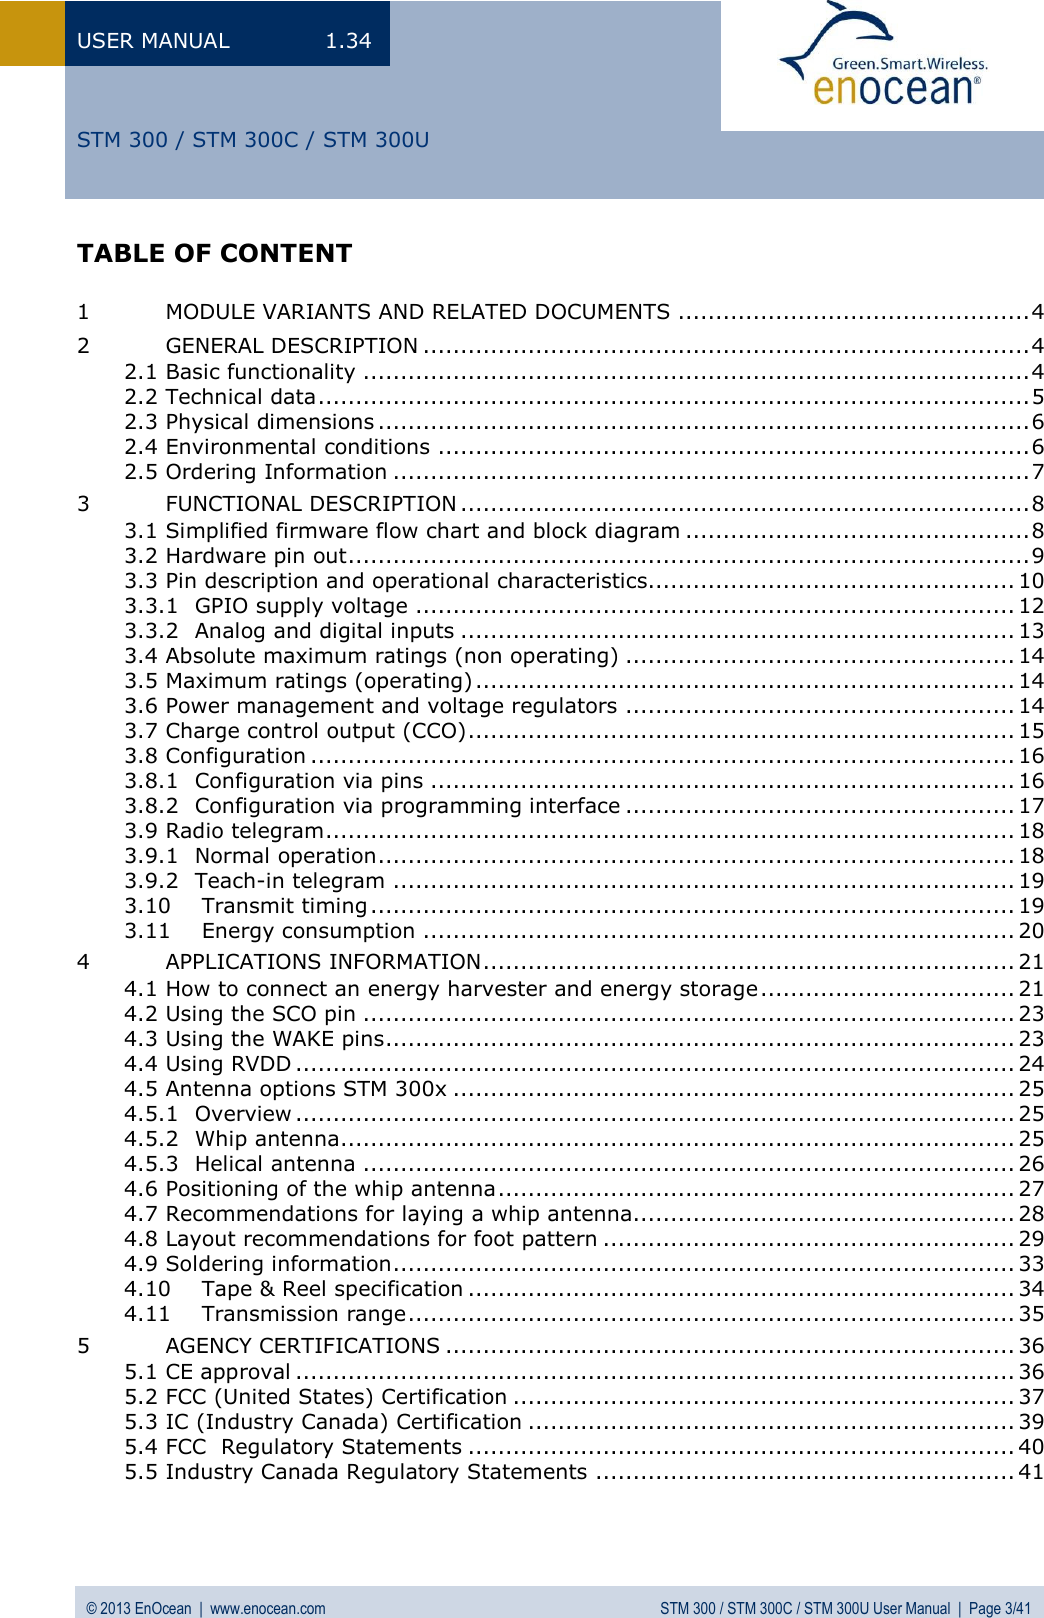 USER MANUAL  1.34 © 2013 EnOcean  |  www.enocean.com  STM 300 / STM 300C / STM 300U User Manual  |  Page 3/41   STM 300 / STM 300C / STM 300U TABLE OF CONTENT  1 MODULE VARIANTS AND RELATED DOCUMENTS ............................................... 4 2 GENERAL DESCRIPTION ................................................................................. 4 2.1 Basic functionality ......................................................................................... 4 2.2 Technical data ............................................................................................... 5 2.3 Physical dimensions ....................................................................................... 6 2.4 Environmental conditions ............................................................................... 6 2.5 Ordering Information ..................................................................................... 7 3 FUNCTIONAL DESCRIPTION ............................................................................ 8 3.1 Simplified firmware flow chart and block diagram .............................................. 8 3.2 Hardware pin out ........................................................................................... 9 3.3 Pin description and operational characteristics ................................................. 10 3.3.1 GPIO supply voltage ................................................................................ 12 3.3.2 Analog and digital inputs .......................................................................... 13 3.4 Absolute maximum ratings (non operating) .................................................... 14 3.5 Maximum ratings (operating) ........................................................................ 14 3.6 Power management and voltage regulators .................................................... 14 3.7 Charge control output (CCO) ......................................................................... 15 3.8 Configuration .............................................................................................. 16 3.8.1 Configuration via pins .............................................................................. 16 3.8.2 Configuration via programming interface .................................................... 17 3.9 Radio telegram ............................................................................................ 18 3.9.1 Normal operation ..................................................................................... 18 3.9.2 Teach-in telegram ................................................................................... 19 3.10 Transmit timing ...................................................................................... 19 3.11 Energy consumption ............................................................................... 20 4 APPLICATIONS INFORMATION ....................................................................... 21 4.1 How to connect an energy harvester and energy storage .................................. 21 4.2 Using the SCO pin ....................................................................................... 23 4.3 Using the WAKE pins .................................................................................... 23 4.4 Using RVDD ................................................................................................ 24 4.5 Antenna options STM 300x ........................................................................... 25 4.5.1 Overview ................................................................................................ 25 4.5.2 Whip antenna .......................................................................................... 25 4.5.3 Helical antenna ....................................................................................... 26 4.6 Positioning of the whip antenna ..................................................................... 27 4.7 Recommendations for laying a whip antenna................................................... 28 4.8 Layout recommendations for foot pattern ....................................................... 29 4.9 Soldering information ................................................................................... 33 4.10 Tape &amp; Reel specification ......................................................................... 34 4.11 Transmission range ................................................................................. 35 5 AGENCY CERTIFICATIONS ............................................................................ 36 5.1 CE approval ................................................................................................ 36 5.2 FCC (United States) Certification ................................................................... 37 5.3 IC (Industry Canada) Certification ................................................................. 39 5.4 FCC  Regulatory Statements ......................................................................... 40 5.5 Industry Canada Regulatory Statements ........................................................ 41   